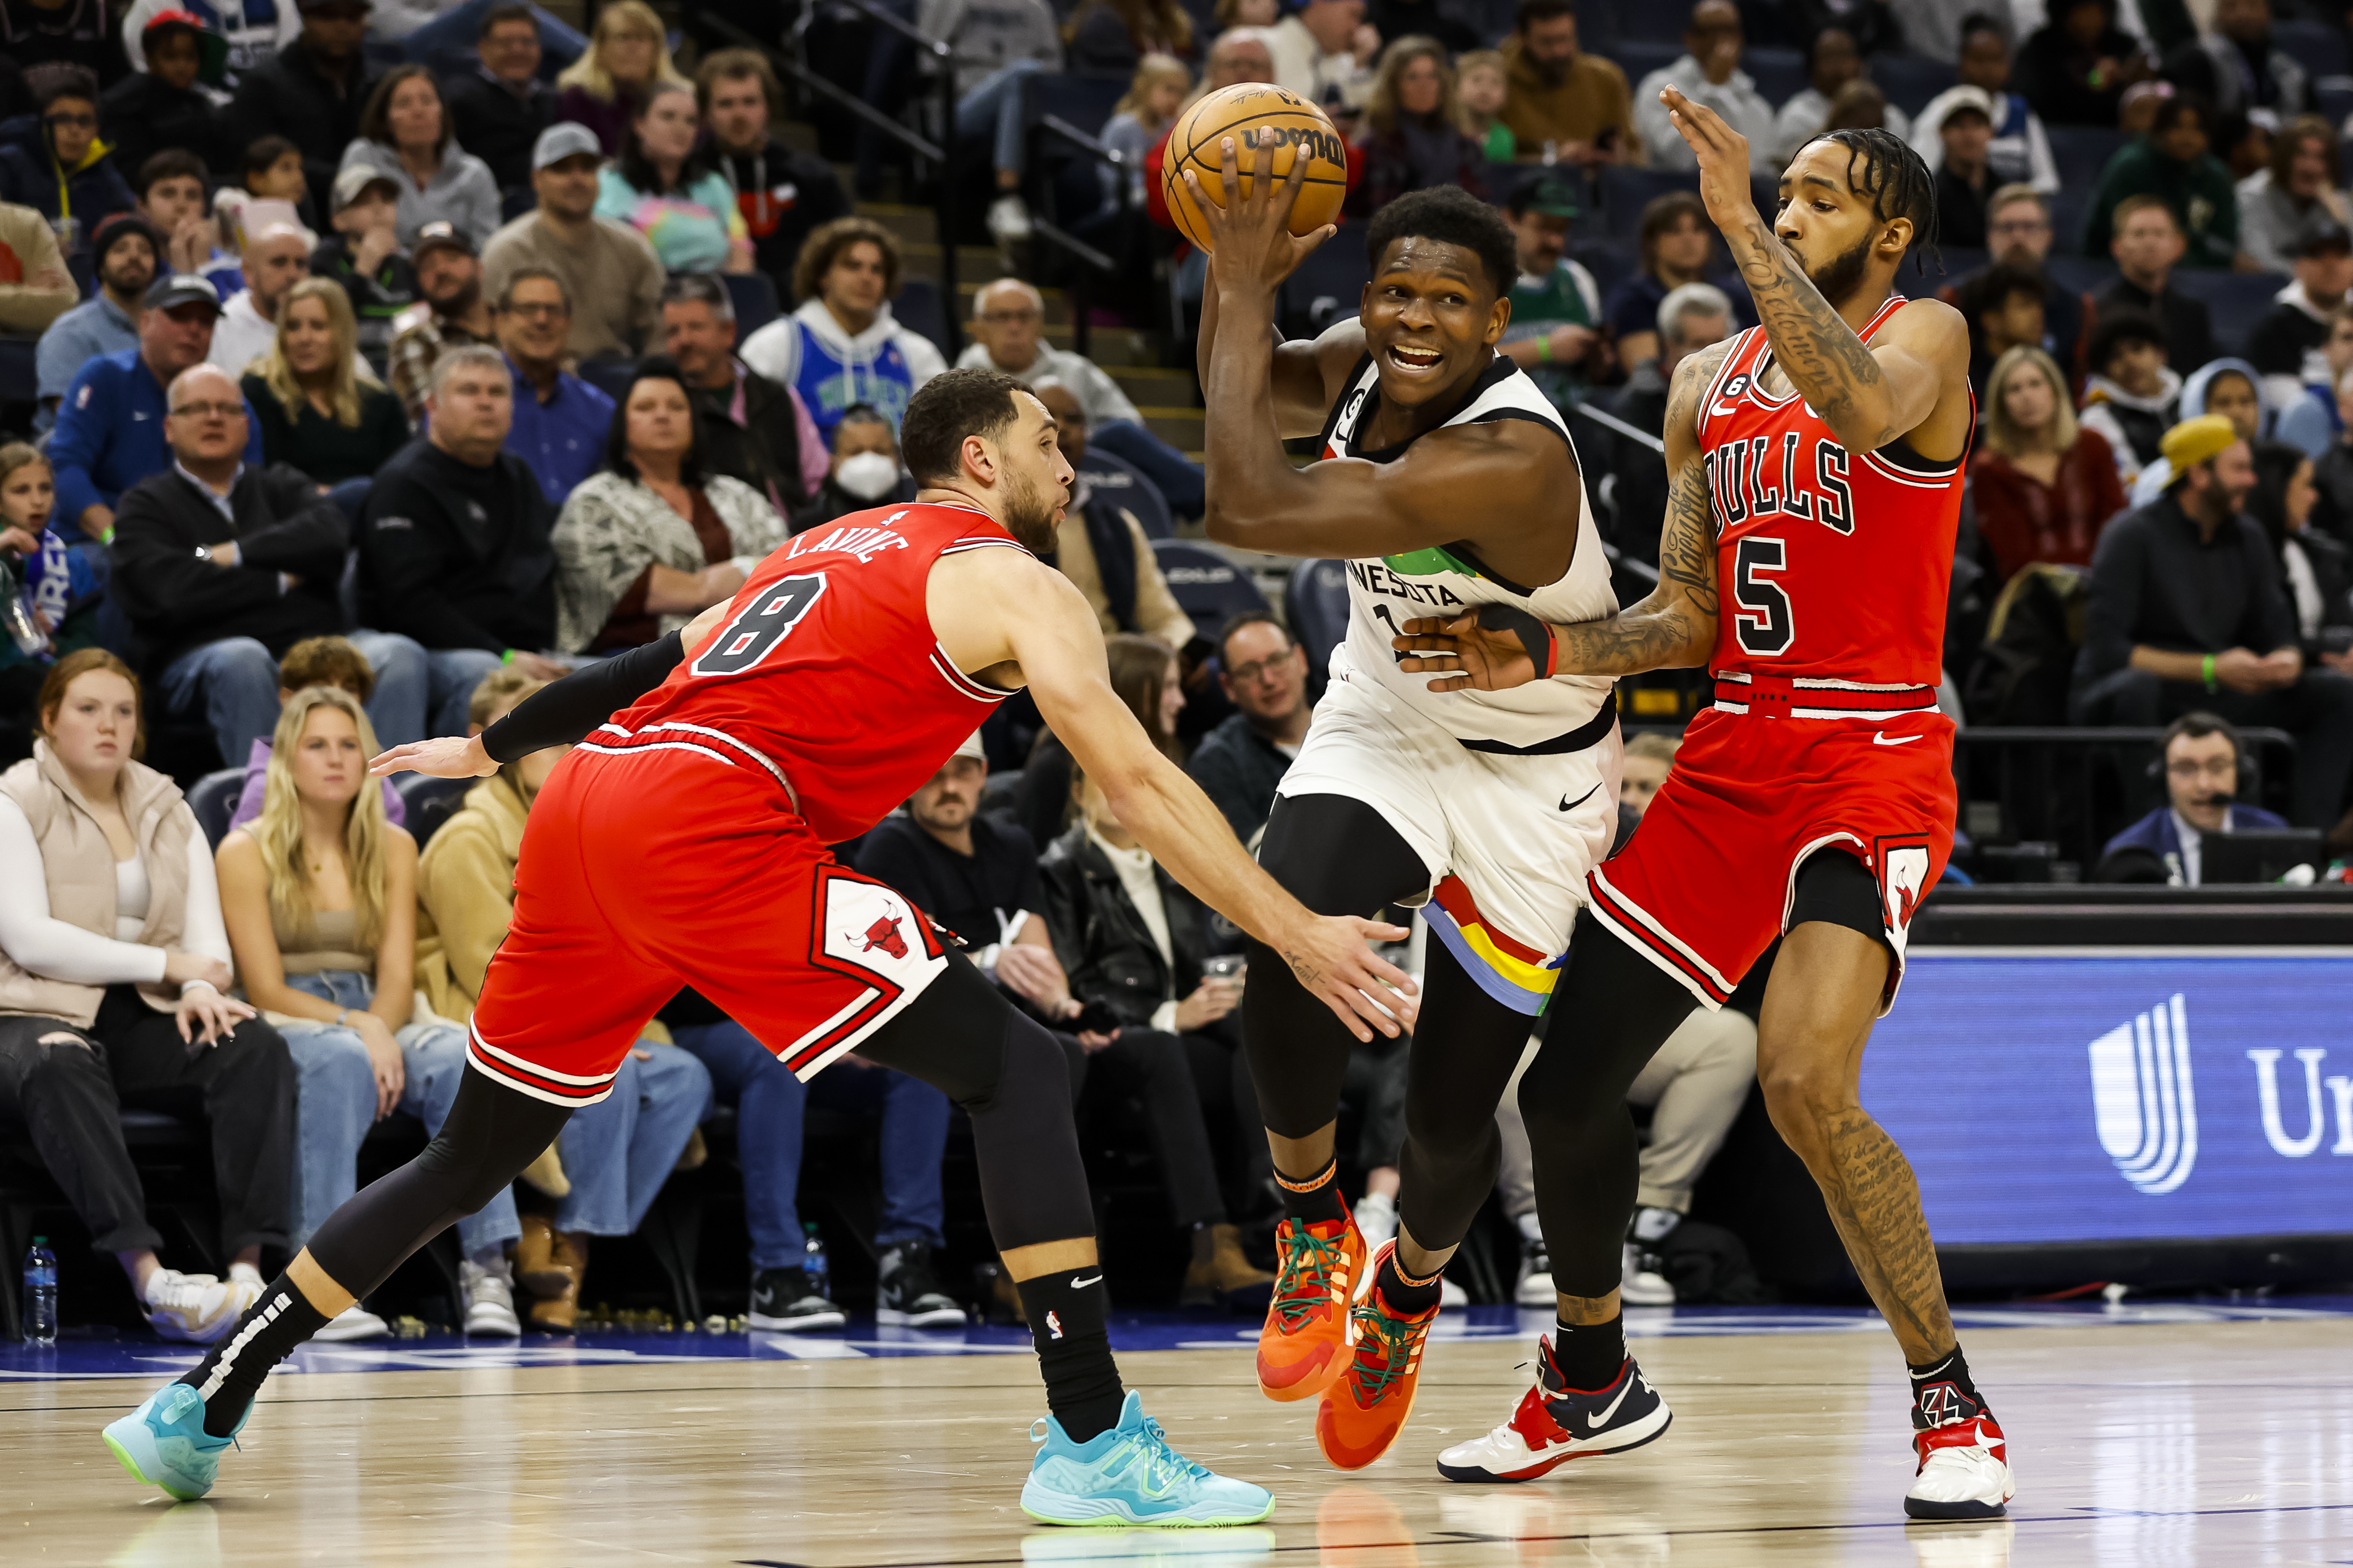 Anthony Edwards of the Minnesota Timberwolves drives to the basket while Zach LaVine and Derrick Jones Jr. of the Chicago Bulls defend in the first quarter of the game at Target Center on December 18, 2022 in Minneapolis, Minnesota. The Timberwolves defeated the Bulls 150-126. 